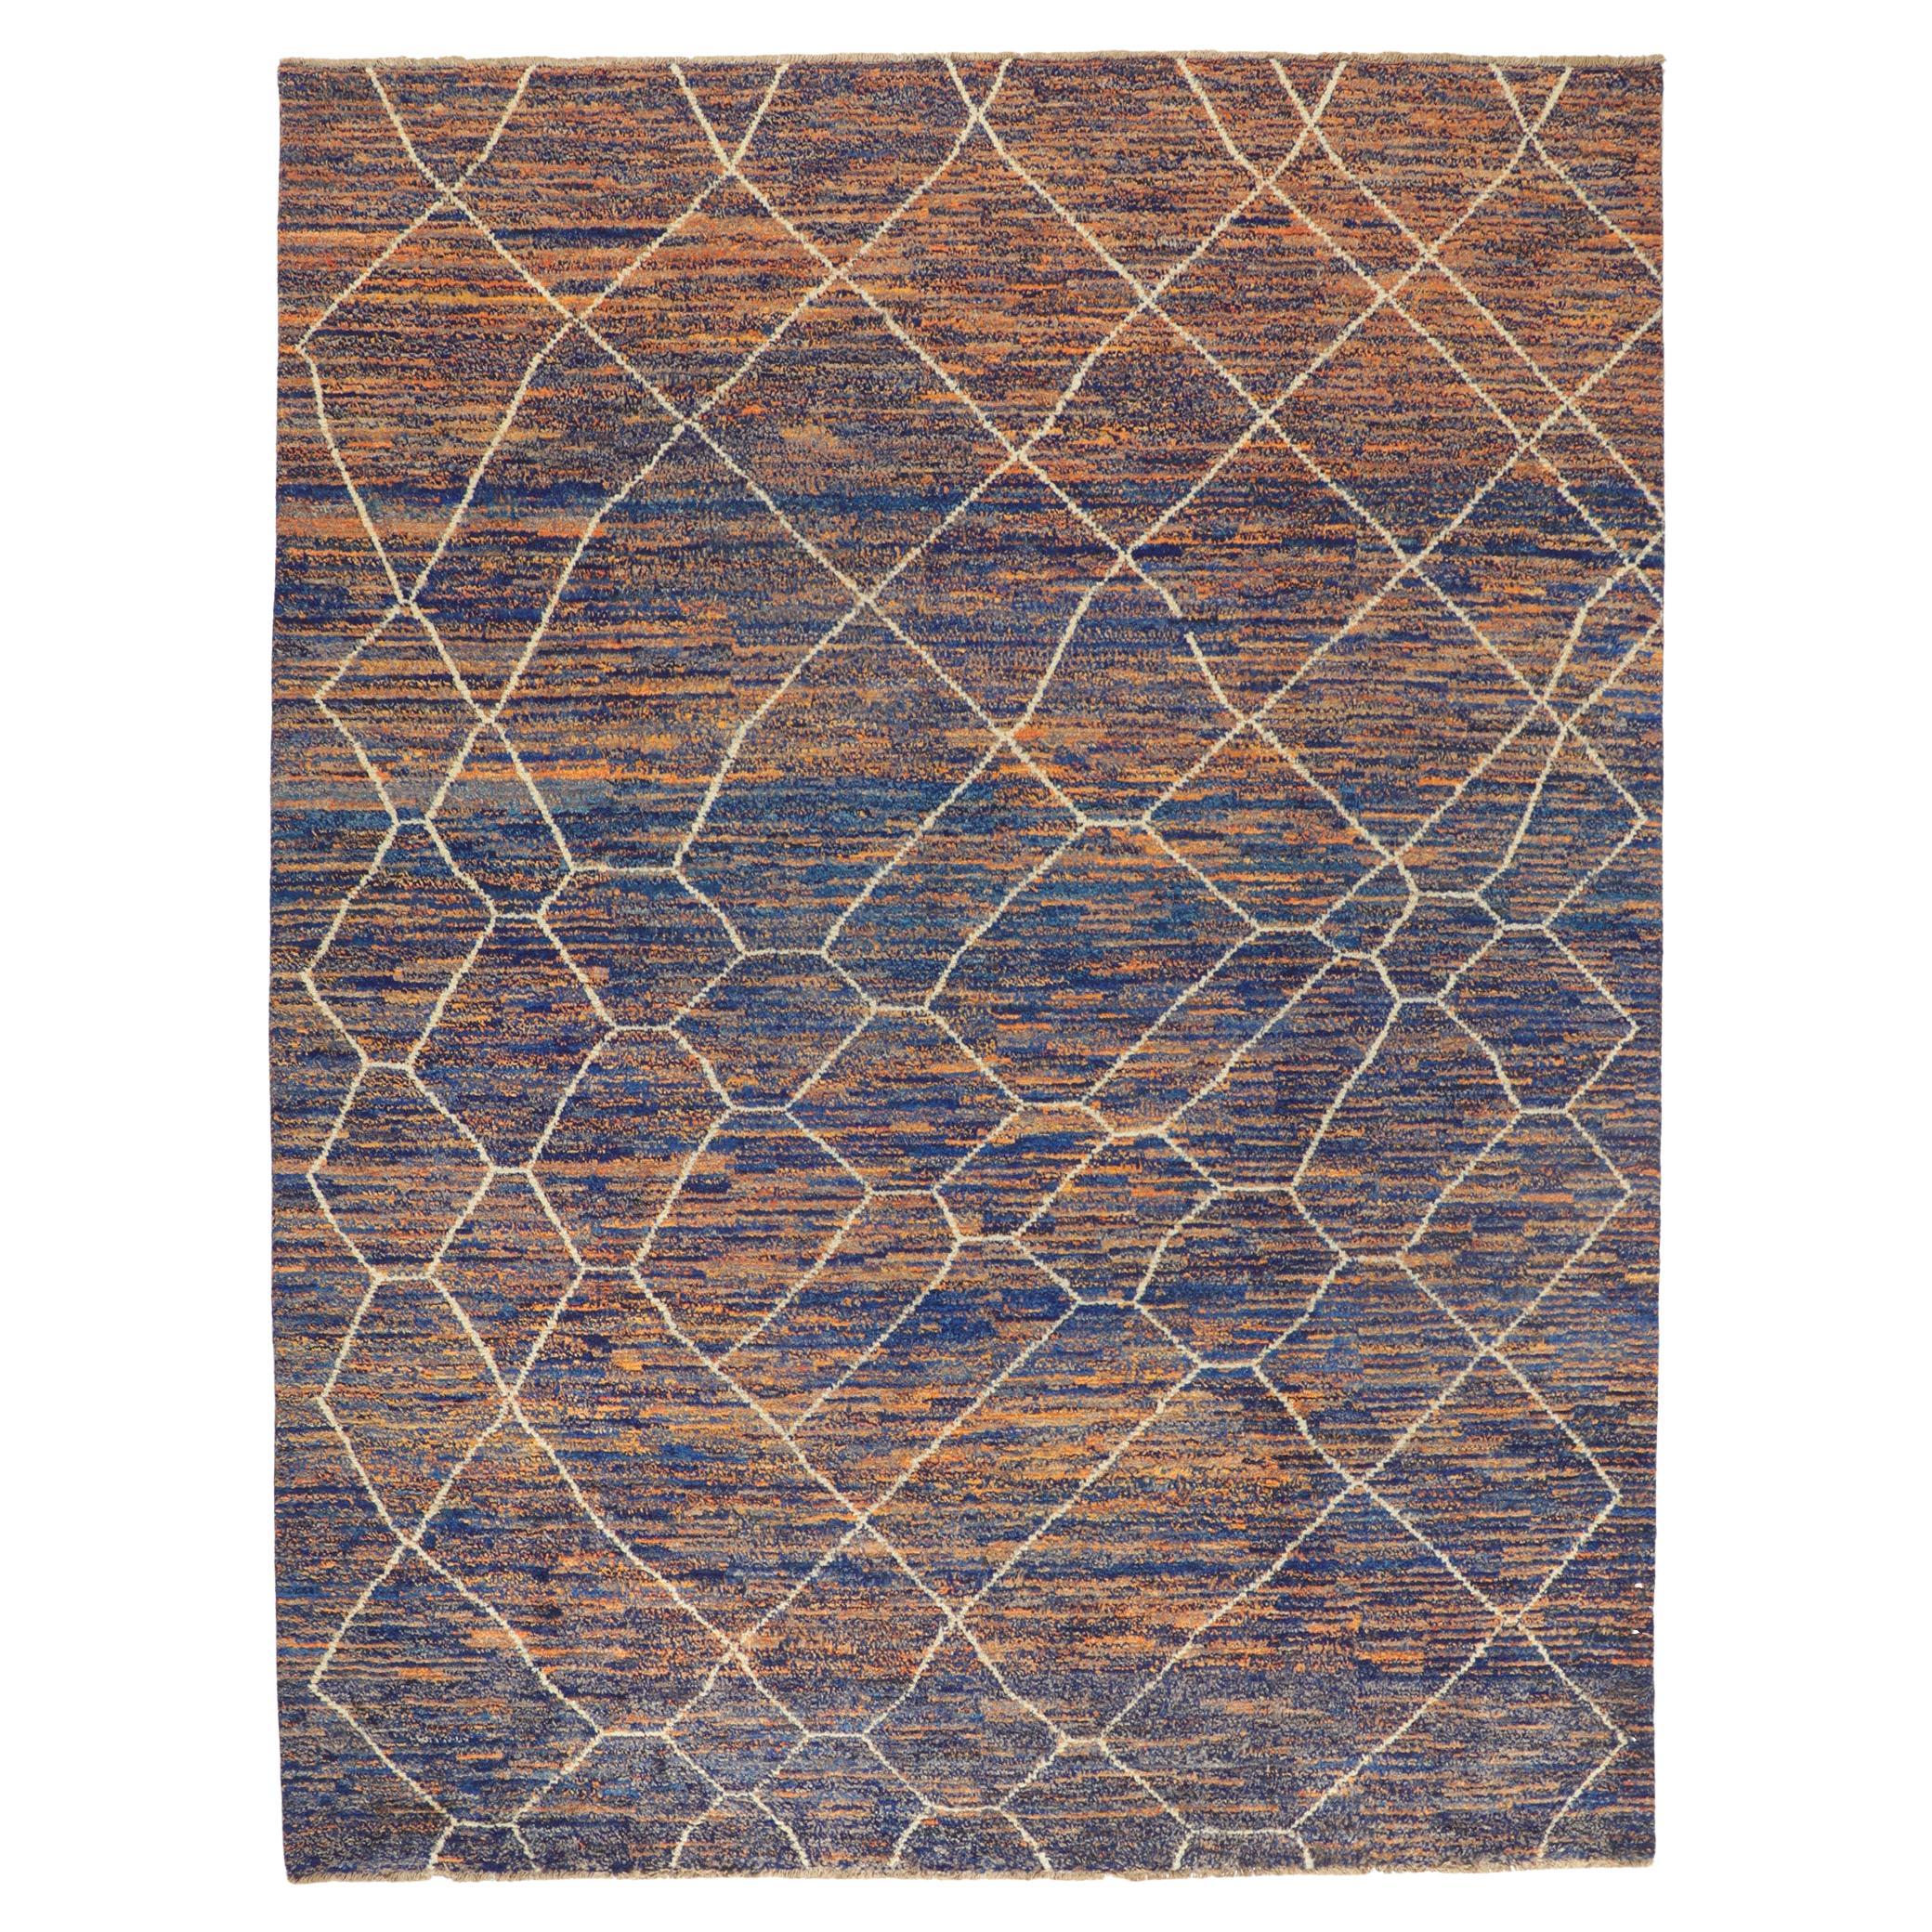 New Large Abstract Moroccan Area Rug For Sale